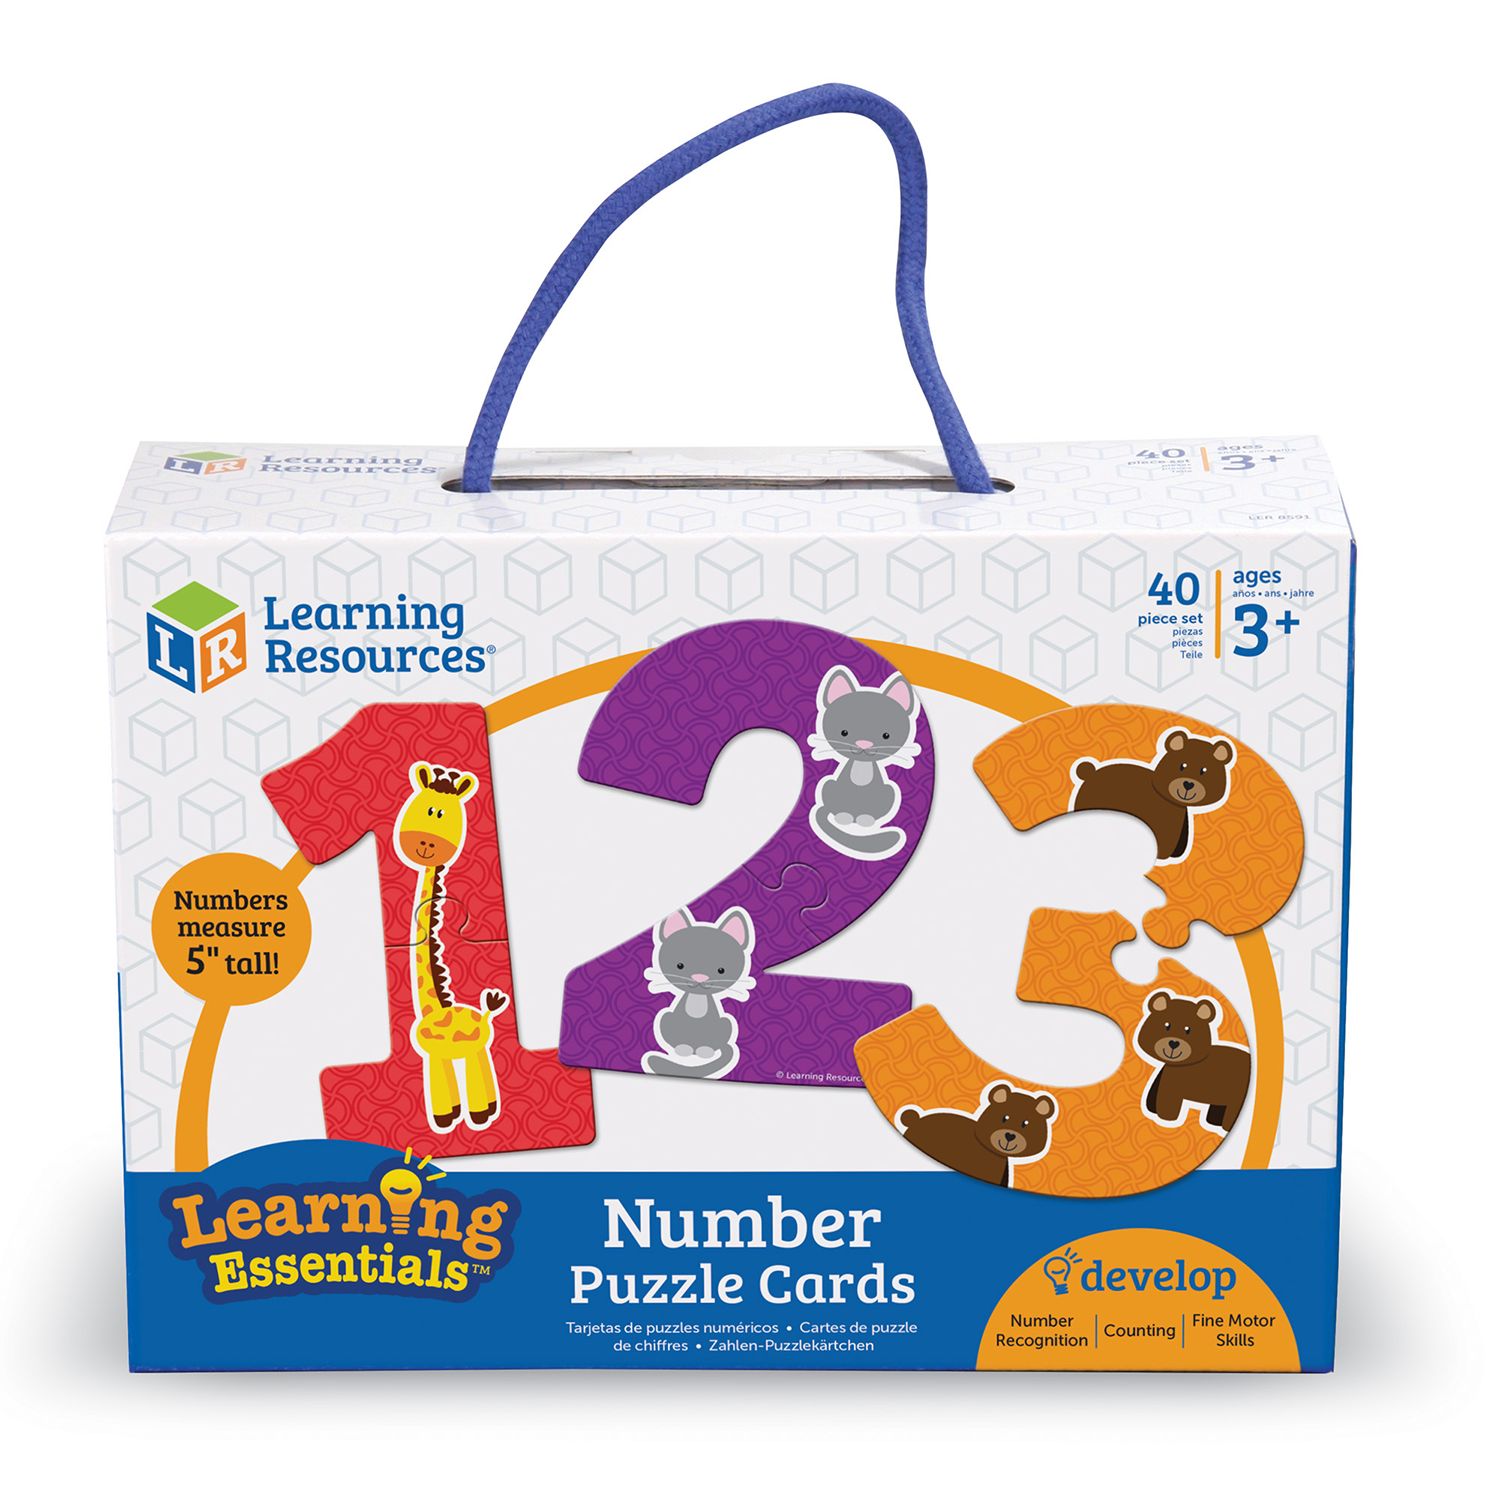 Image for Learning Resources Number Puzzle Cards at Kohl's.